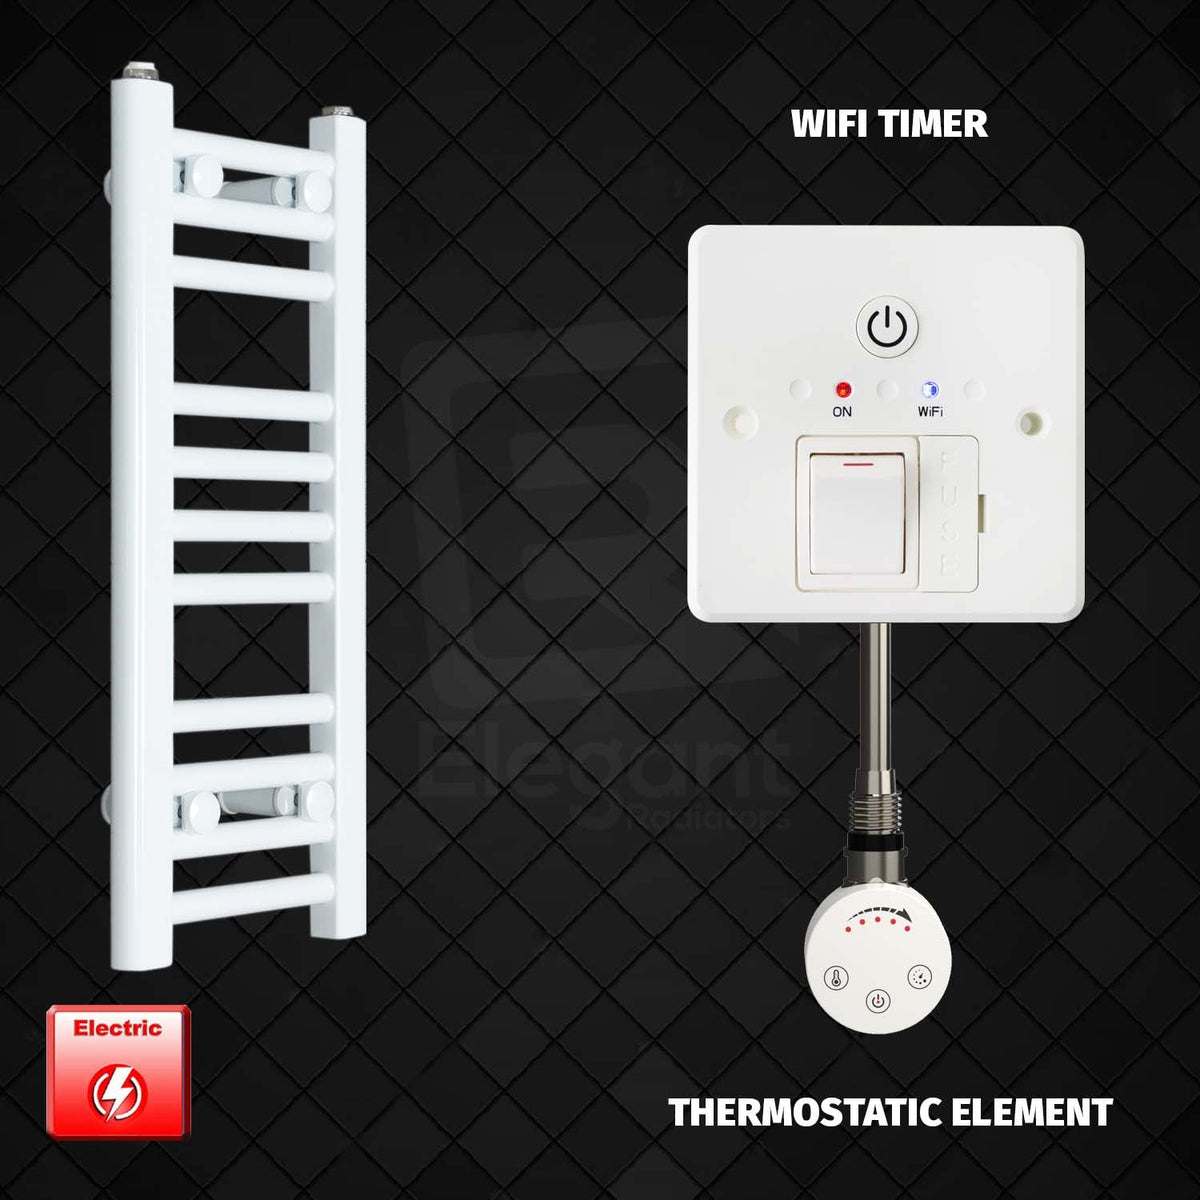 600 x 200 Pre-Filled Electric Heated Towel Radiator White HTR Smart Wifi Timer Thermostatic Element